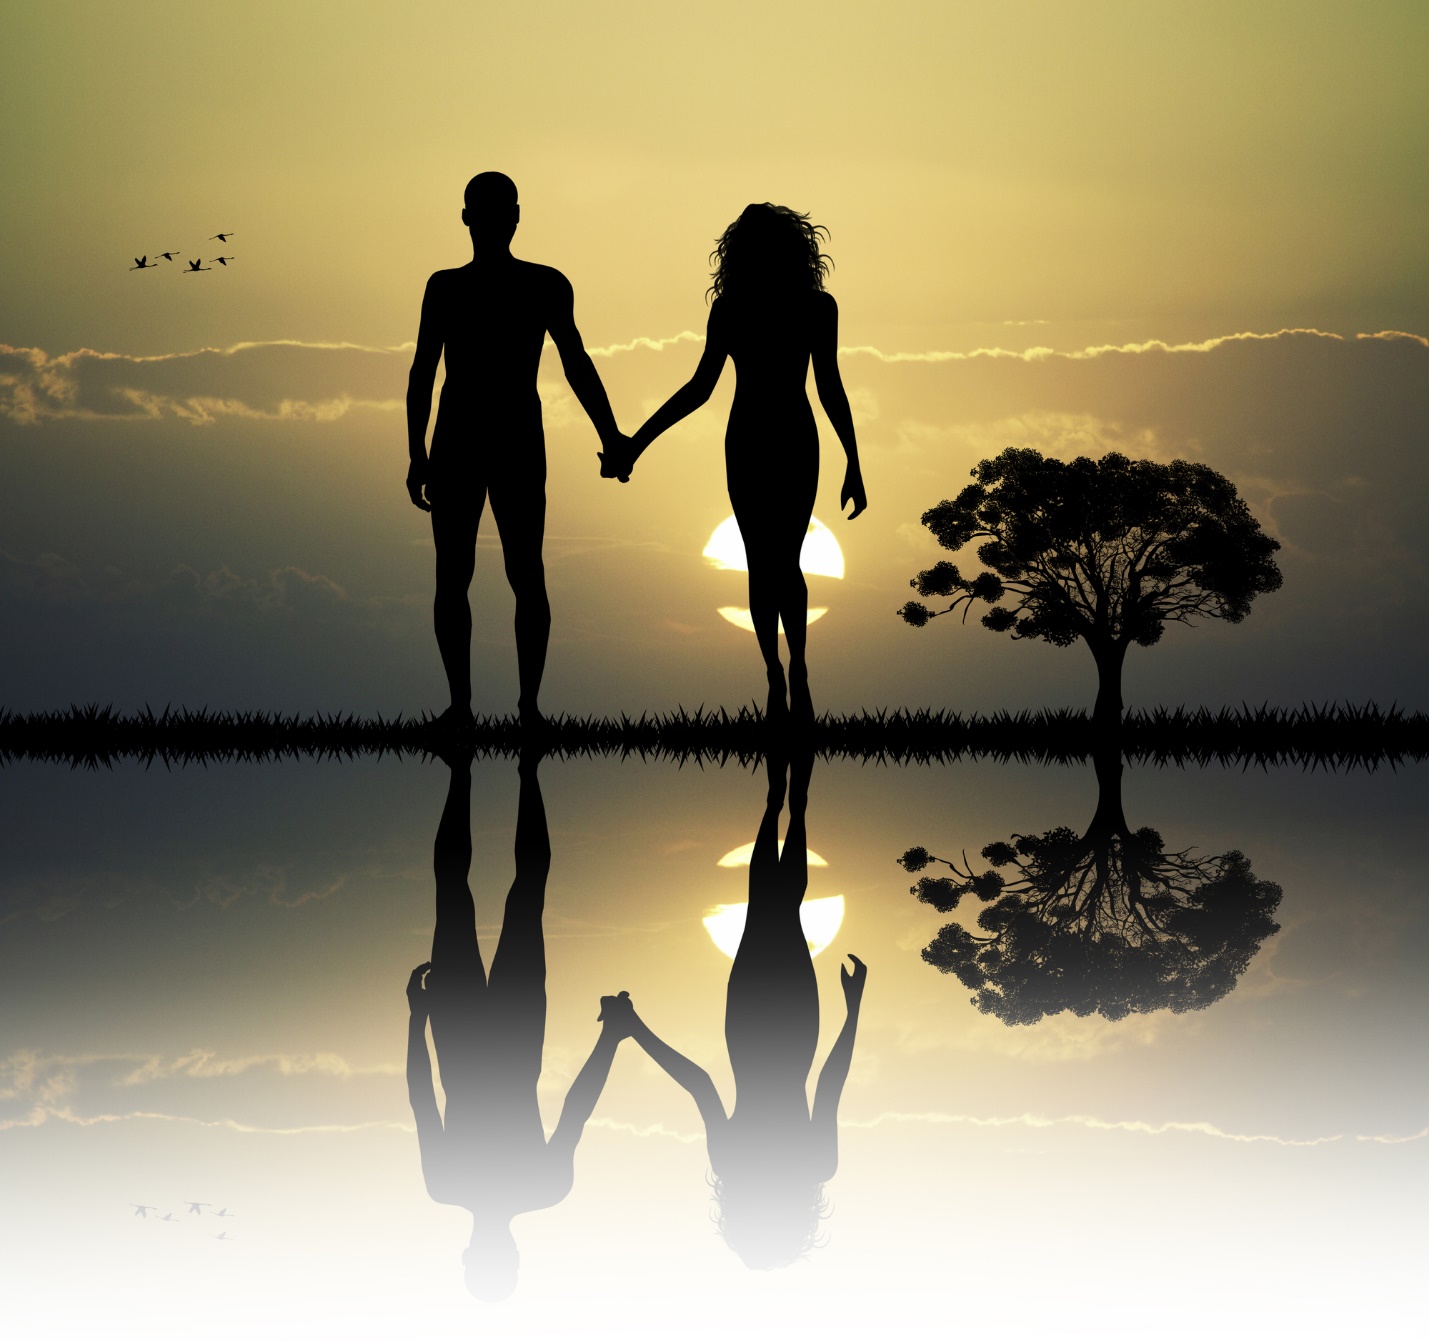 A silhouette of a person and person holding hands and walking on a beach

Description automatically generated with low confidence